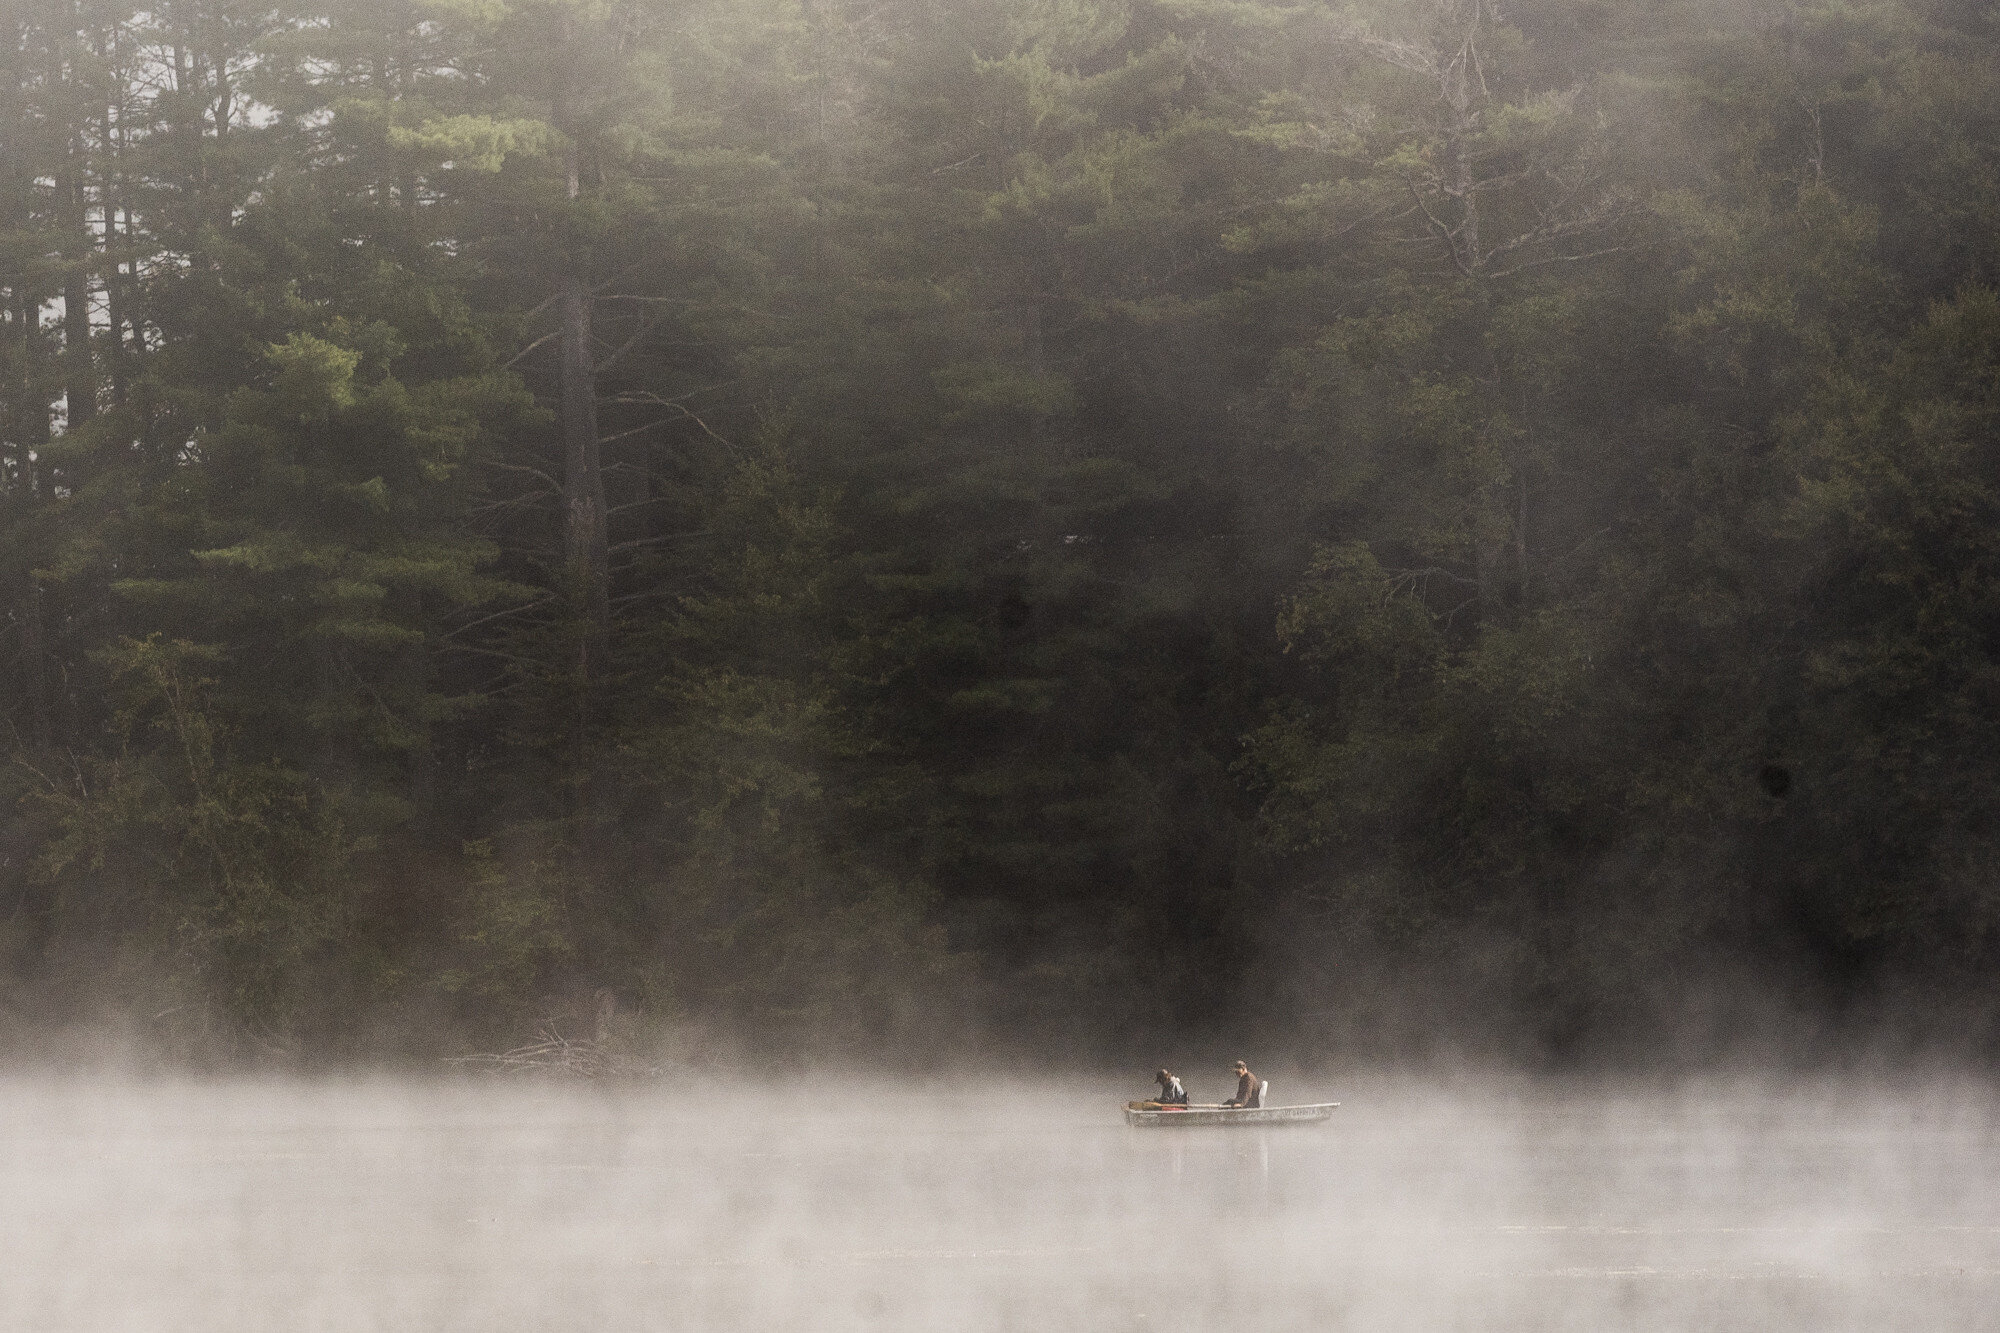  Fishermen share a kayak in the morning fog on North Montpelier Pond on Tuesday, August 27th 2019.  